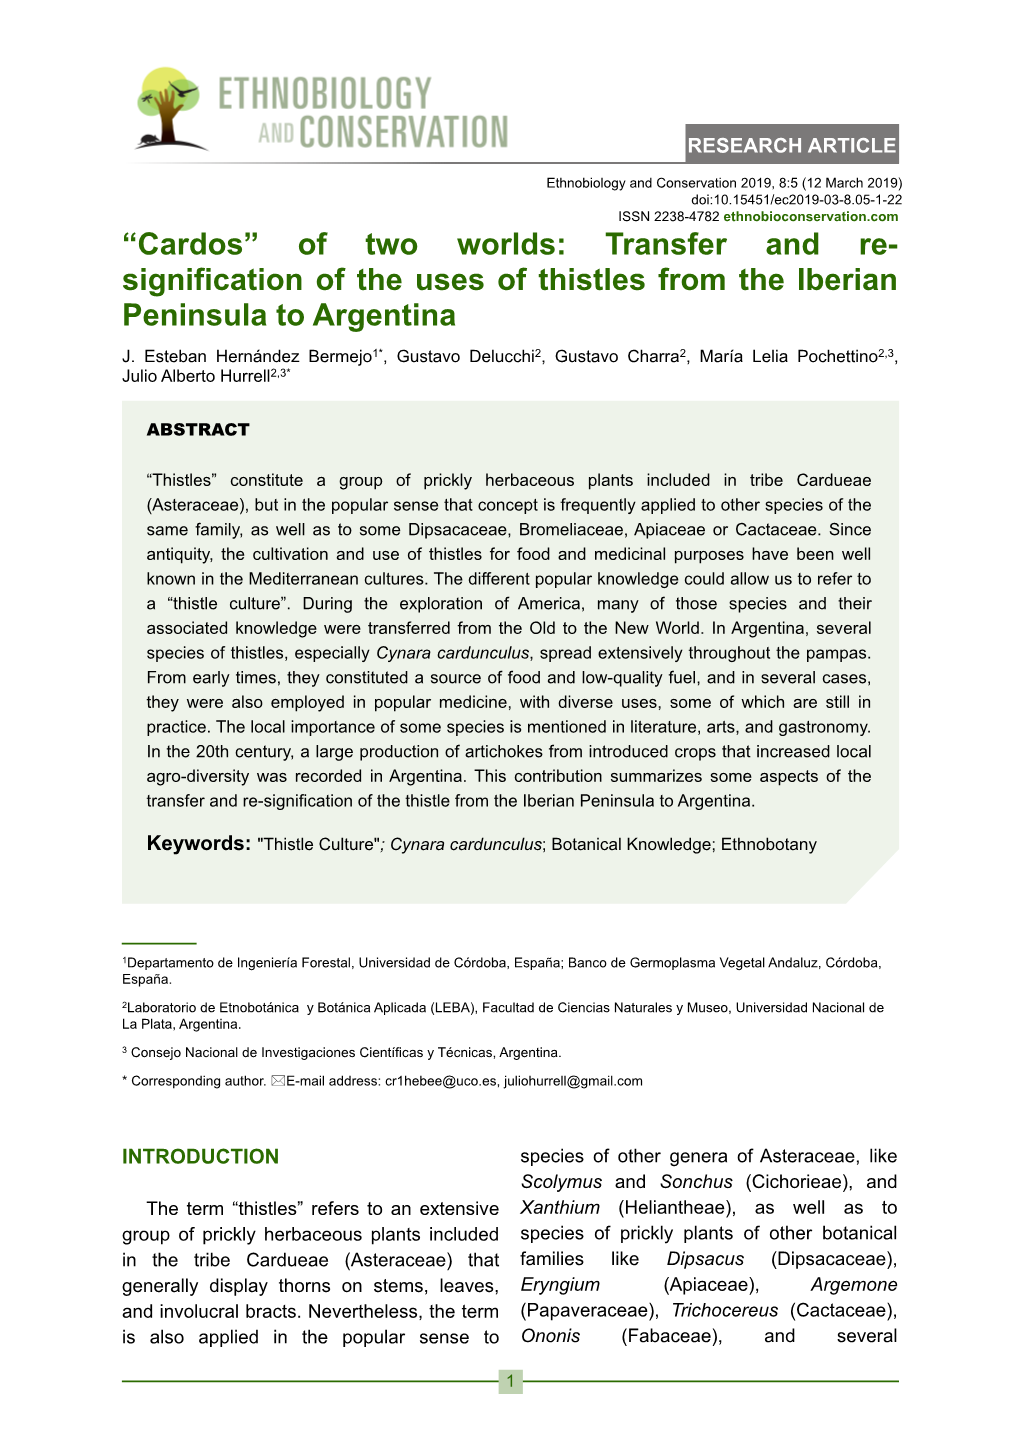 “Cardos” of Two Worlds: Transfer and Re Signification of the Uses of Thistles